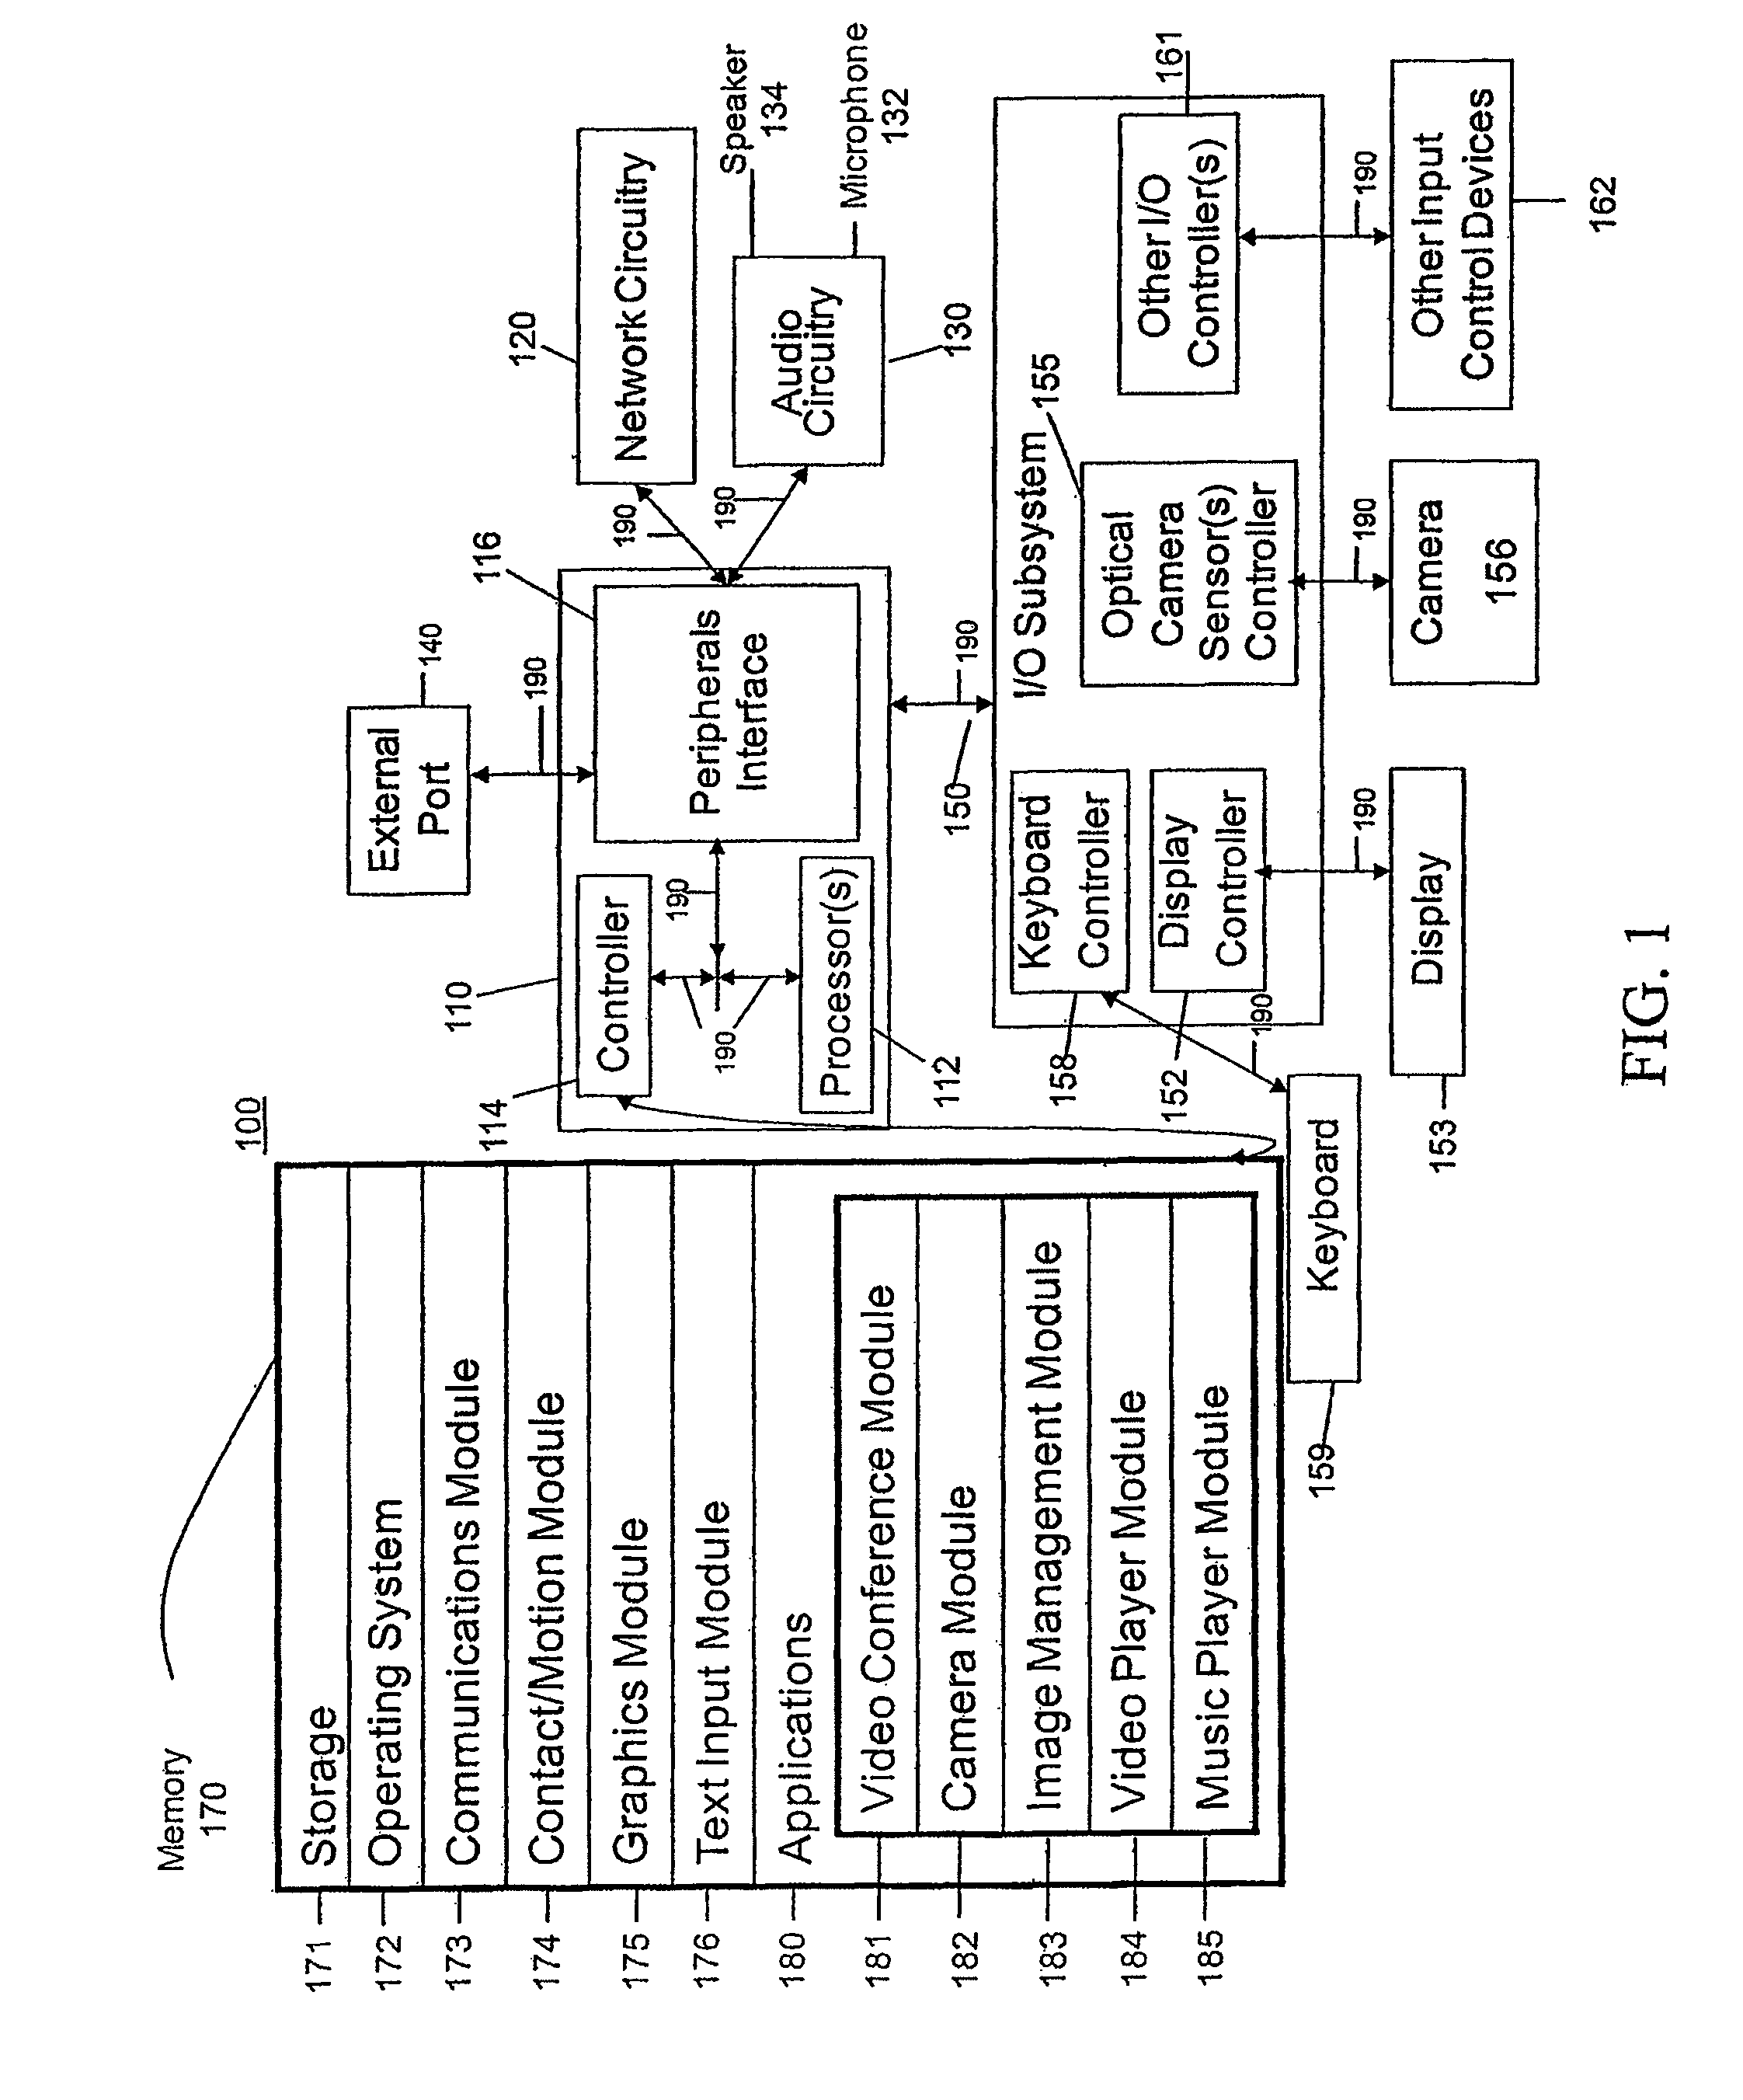 Computer device, method, and graphical user interface for automating the digital transformation, enhancement, and editing of personal and professional videos